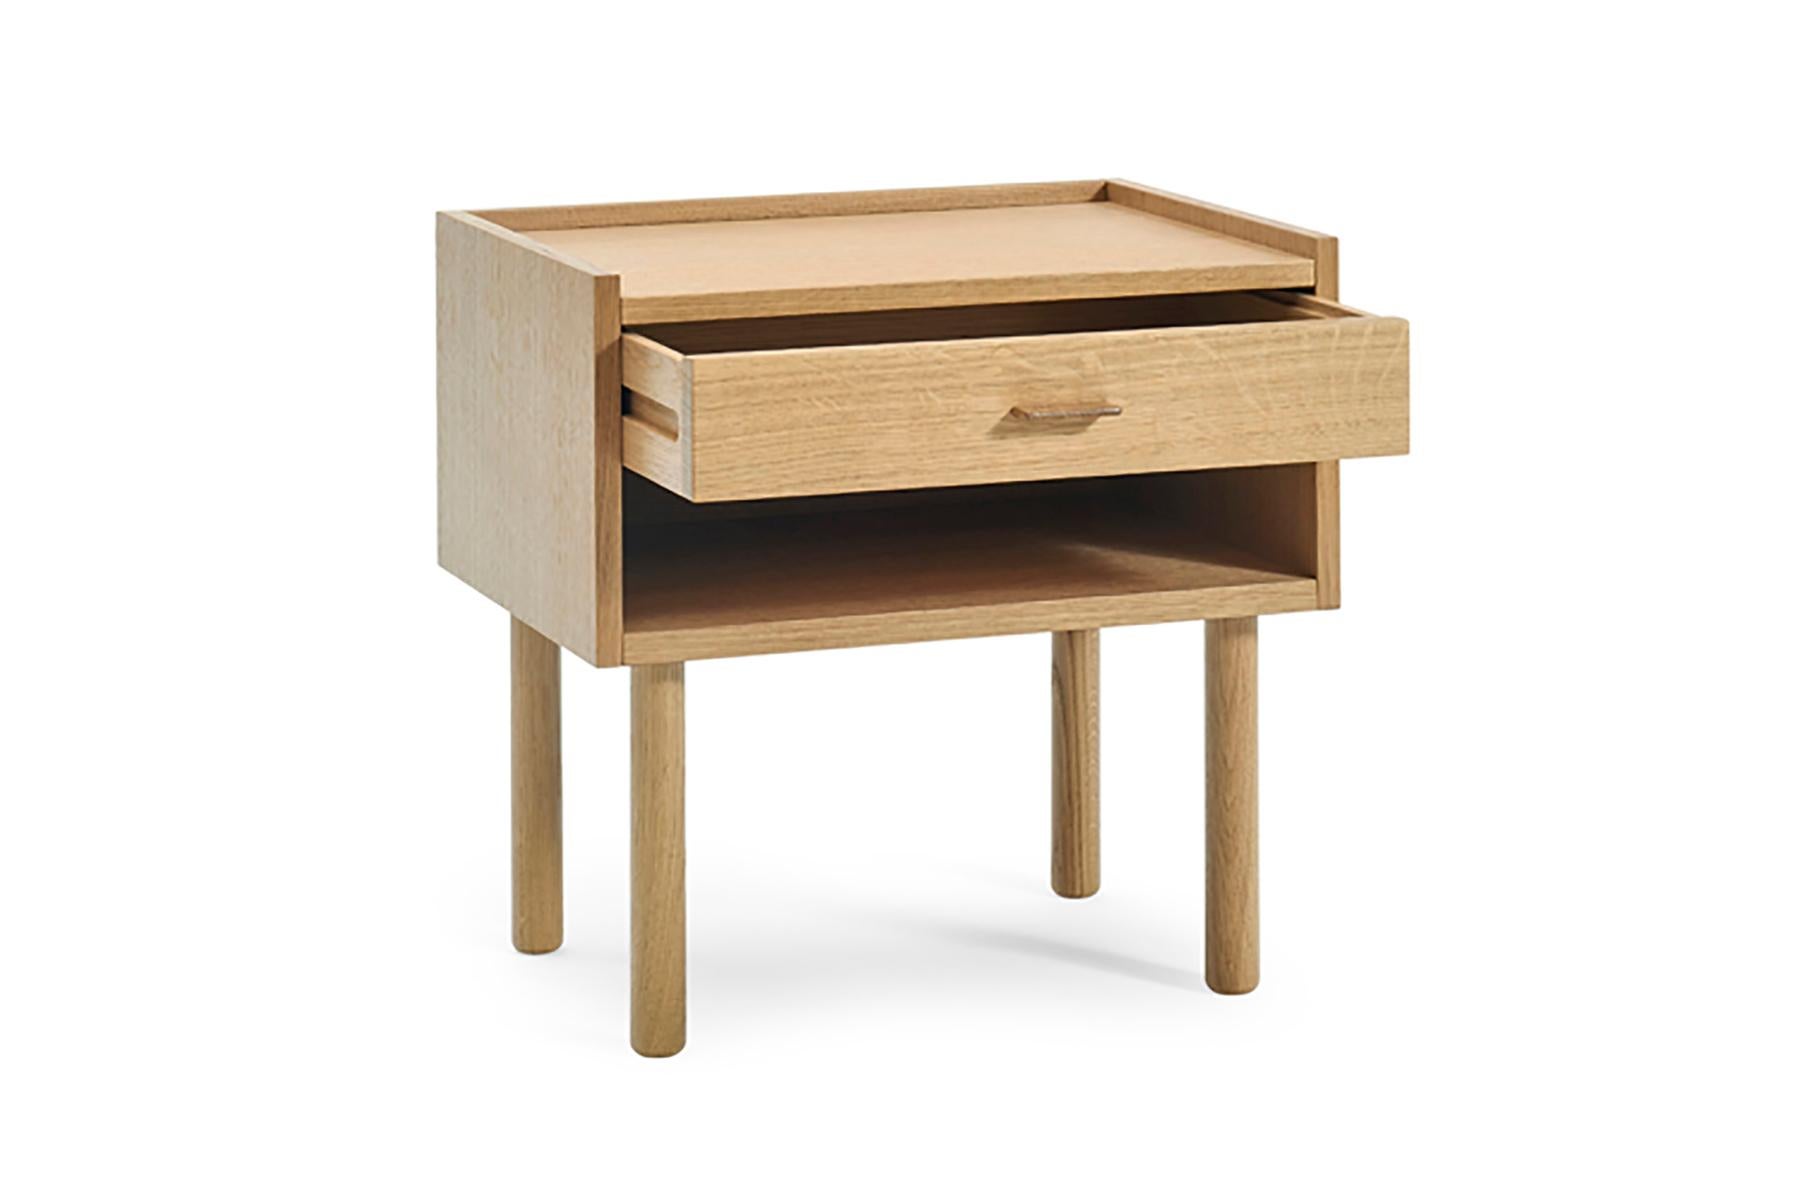 Designed by Hans Wegner for GETAMA in 1969, the 430 nightstand features unparalleled craftsmanship. This chest is hand built at GETAMA’s factory in Gedsted, Denmark by skilled cabinetmakers using traditional Scandinavian techniques.

Lead time: